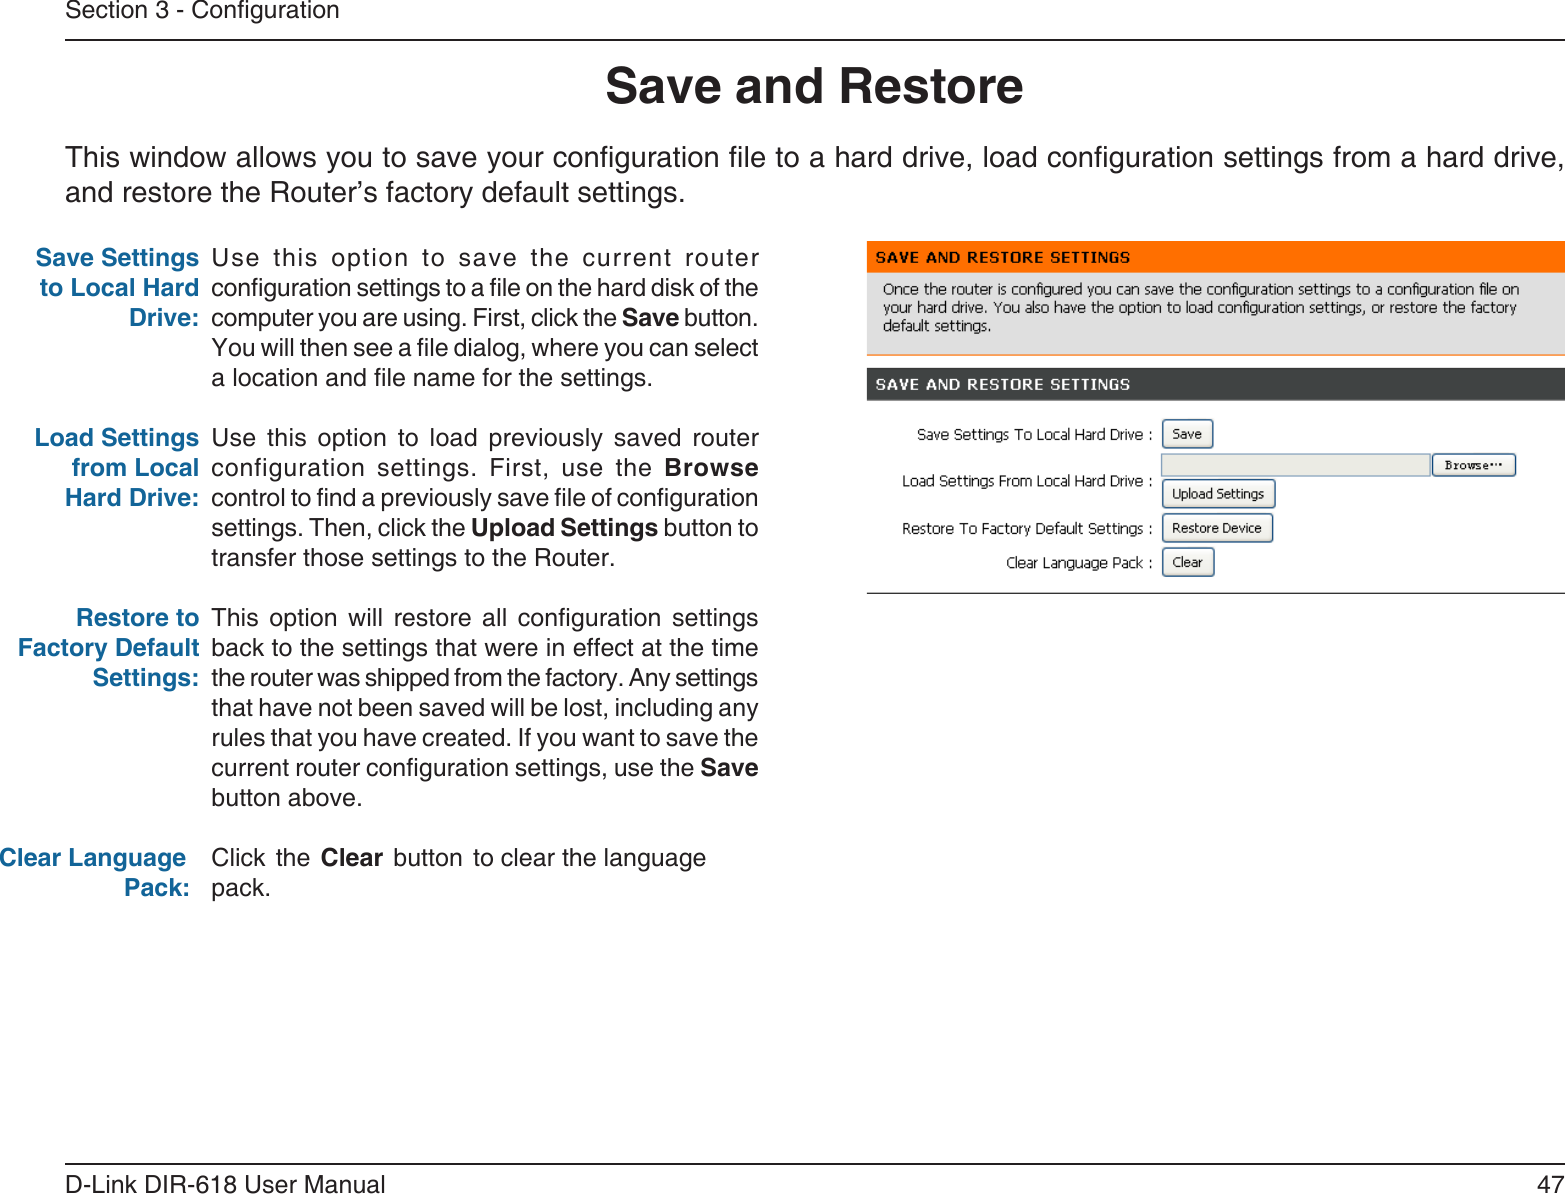 47D-Link DIR-618 User ManualSection 3 - CongurationSave and RestoreUse  this  option  to  save  the  current  routerconguration settings to a le on the hard disk of the computer you are using. First, click the Save button. You will then see a le dialog, where you can select a location and le name for the settings. Use  this  option  to  load  previously  saved  routerconfiguration settings. First, use the Browse control to nd a previously save le of conguration settings. Then, click the Upload Settings button totransfer those settings to the Router. This option will restore all conguration settings back to the settings that were in effect at the timethe router was shipped from the factory. Any settingsthat have not been saved will be lost, including any rules that you have created. If you want to save thecurrent router conguration settings, use the Save button above. Click  the  Clear  button  to clear the languagepack.Save Settings to Local Hard Drive:Load Settings from Local Hard Drive:Restore to Factory Default Settings:Clear Language                  Pack:This window allows you to save your conguration le to a hard drive, load conguration settings from a hard drive, and restore the Router’s factory default settings.